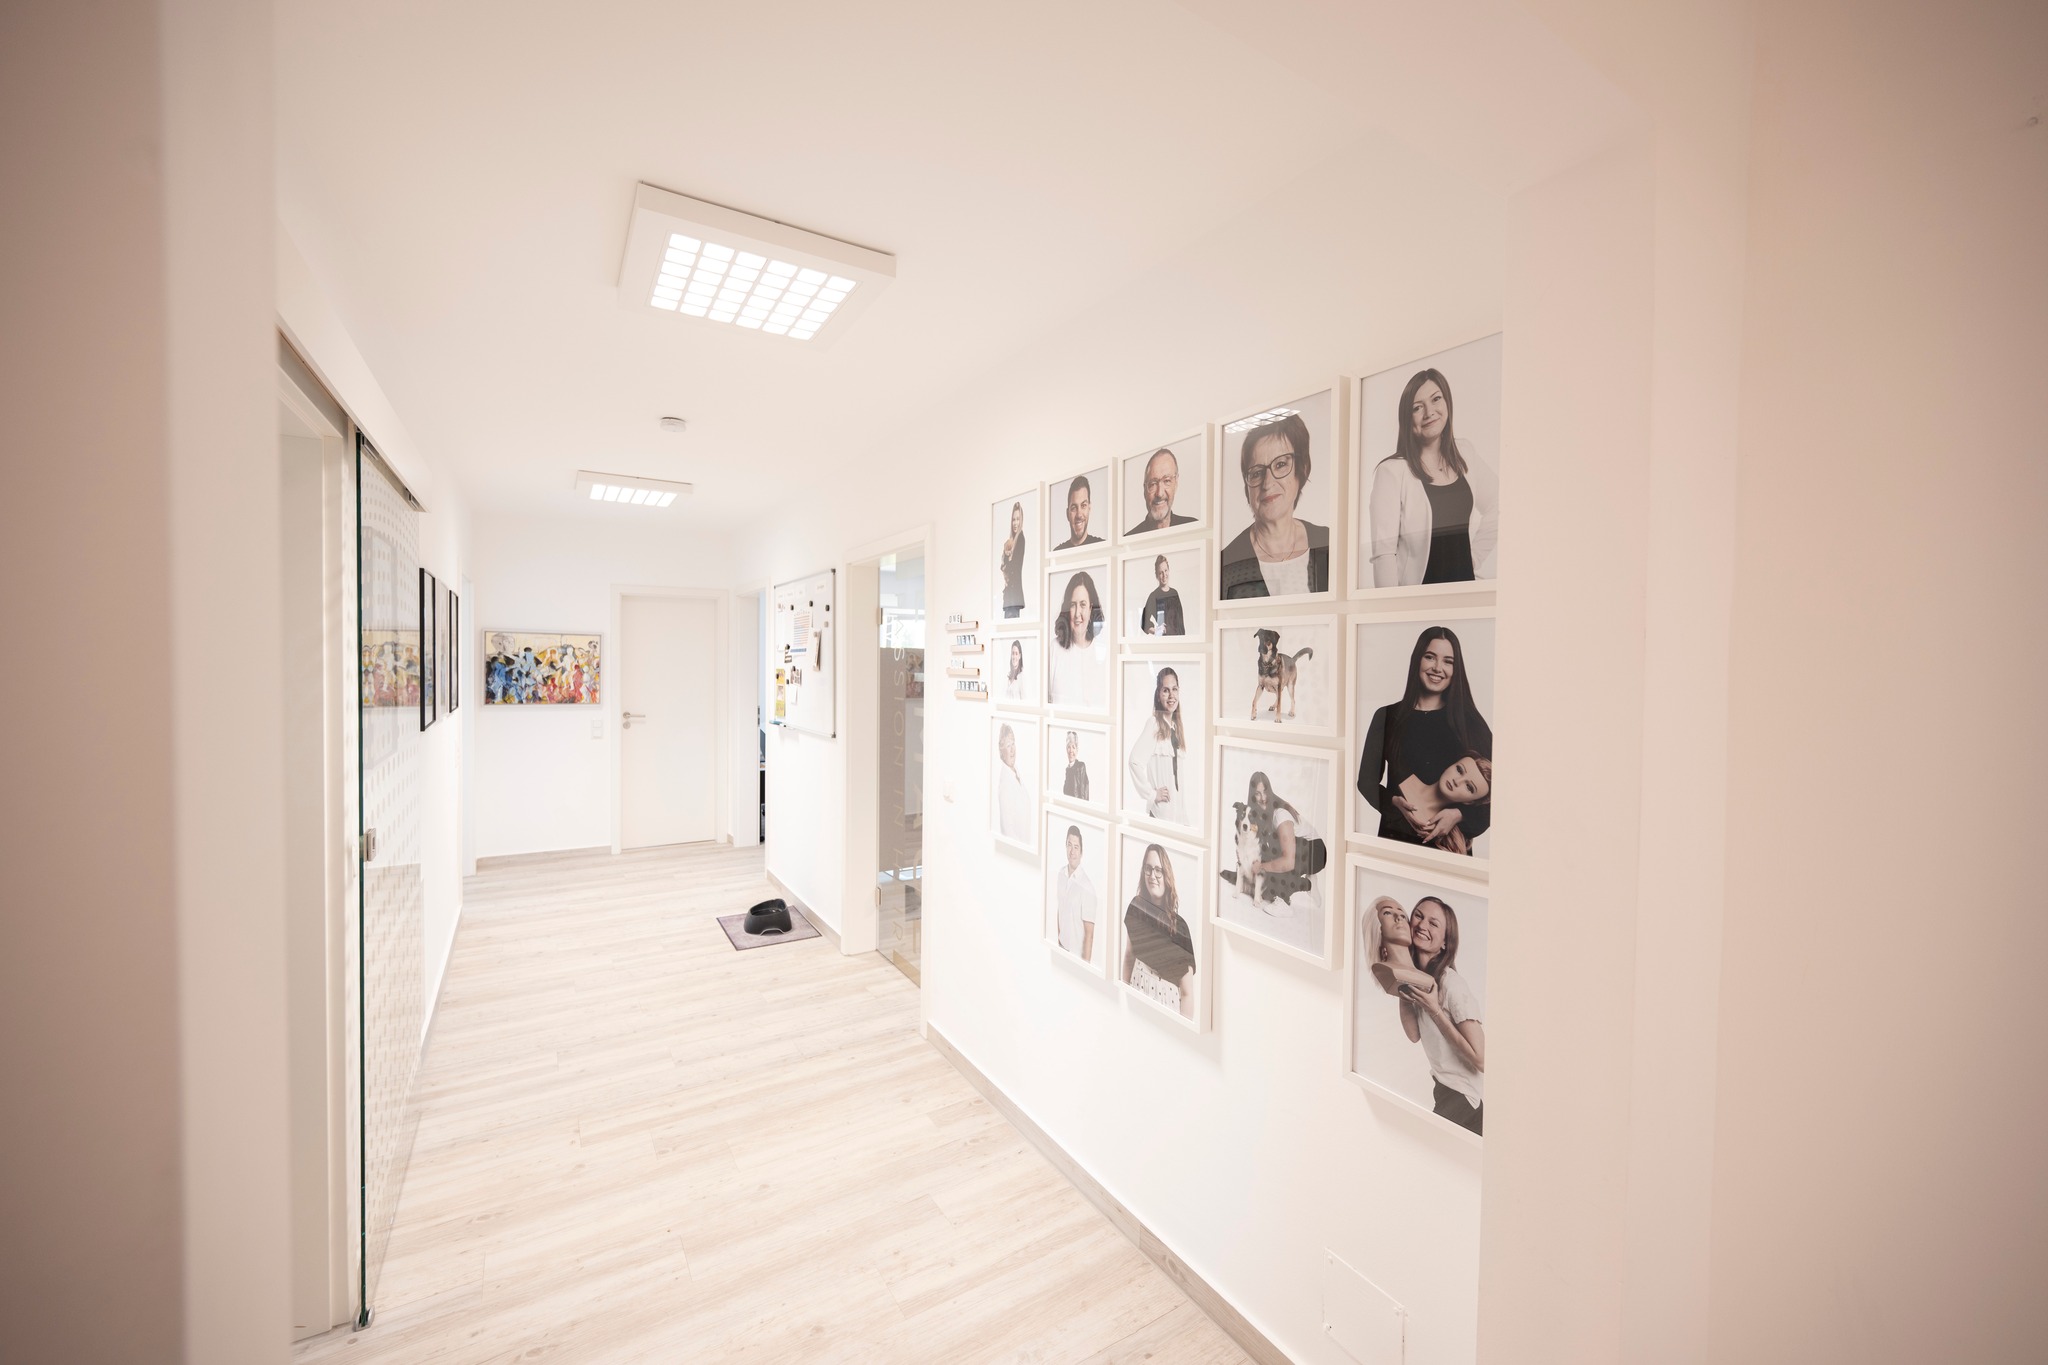 A long, brightly lit corridor, on the right side hang portraits of the team, behind them follow two doors; on the left side you can see a door, and at the end of the corridor also a white door